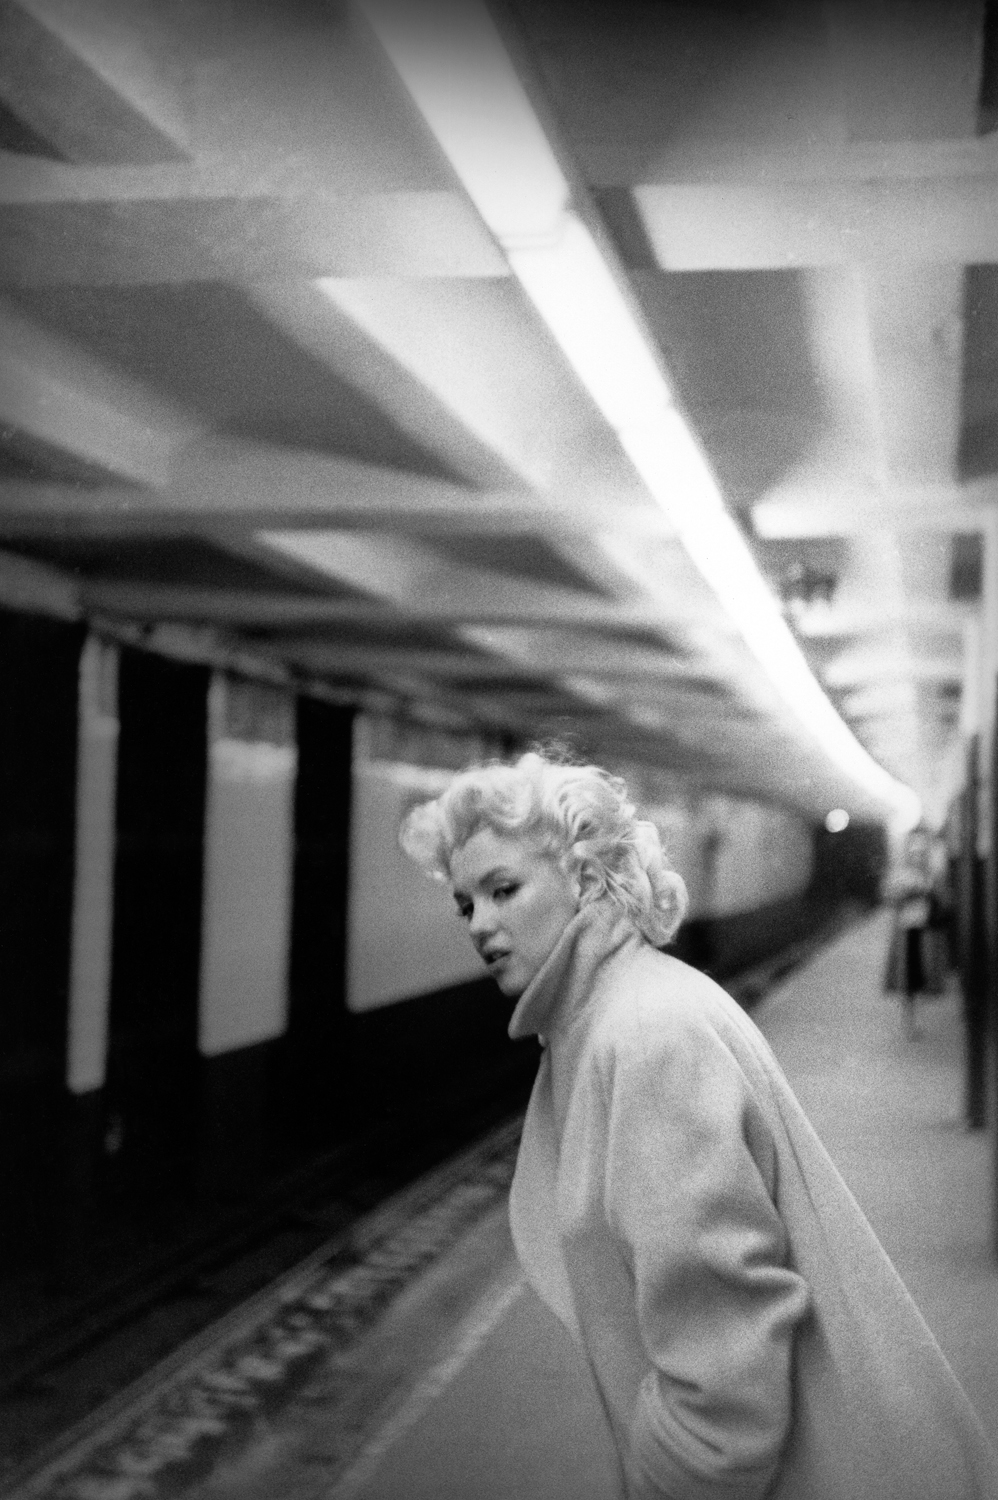 Monroe waits in New York City's Grand Central subway station in 1955.